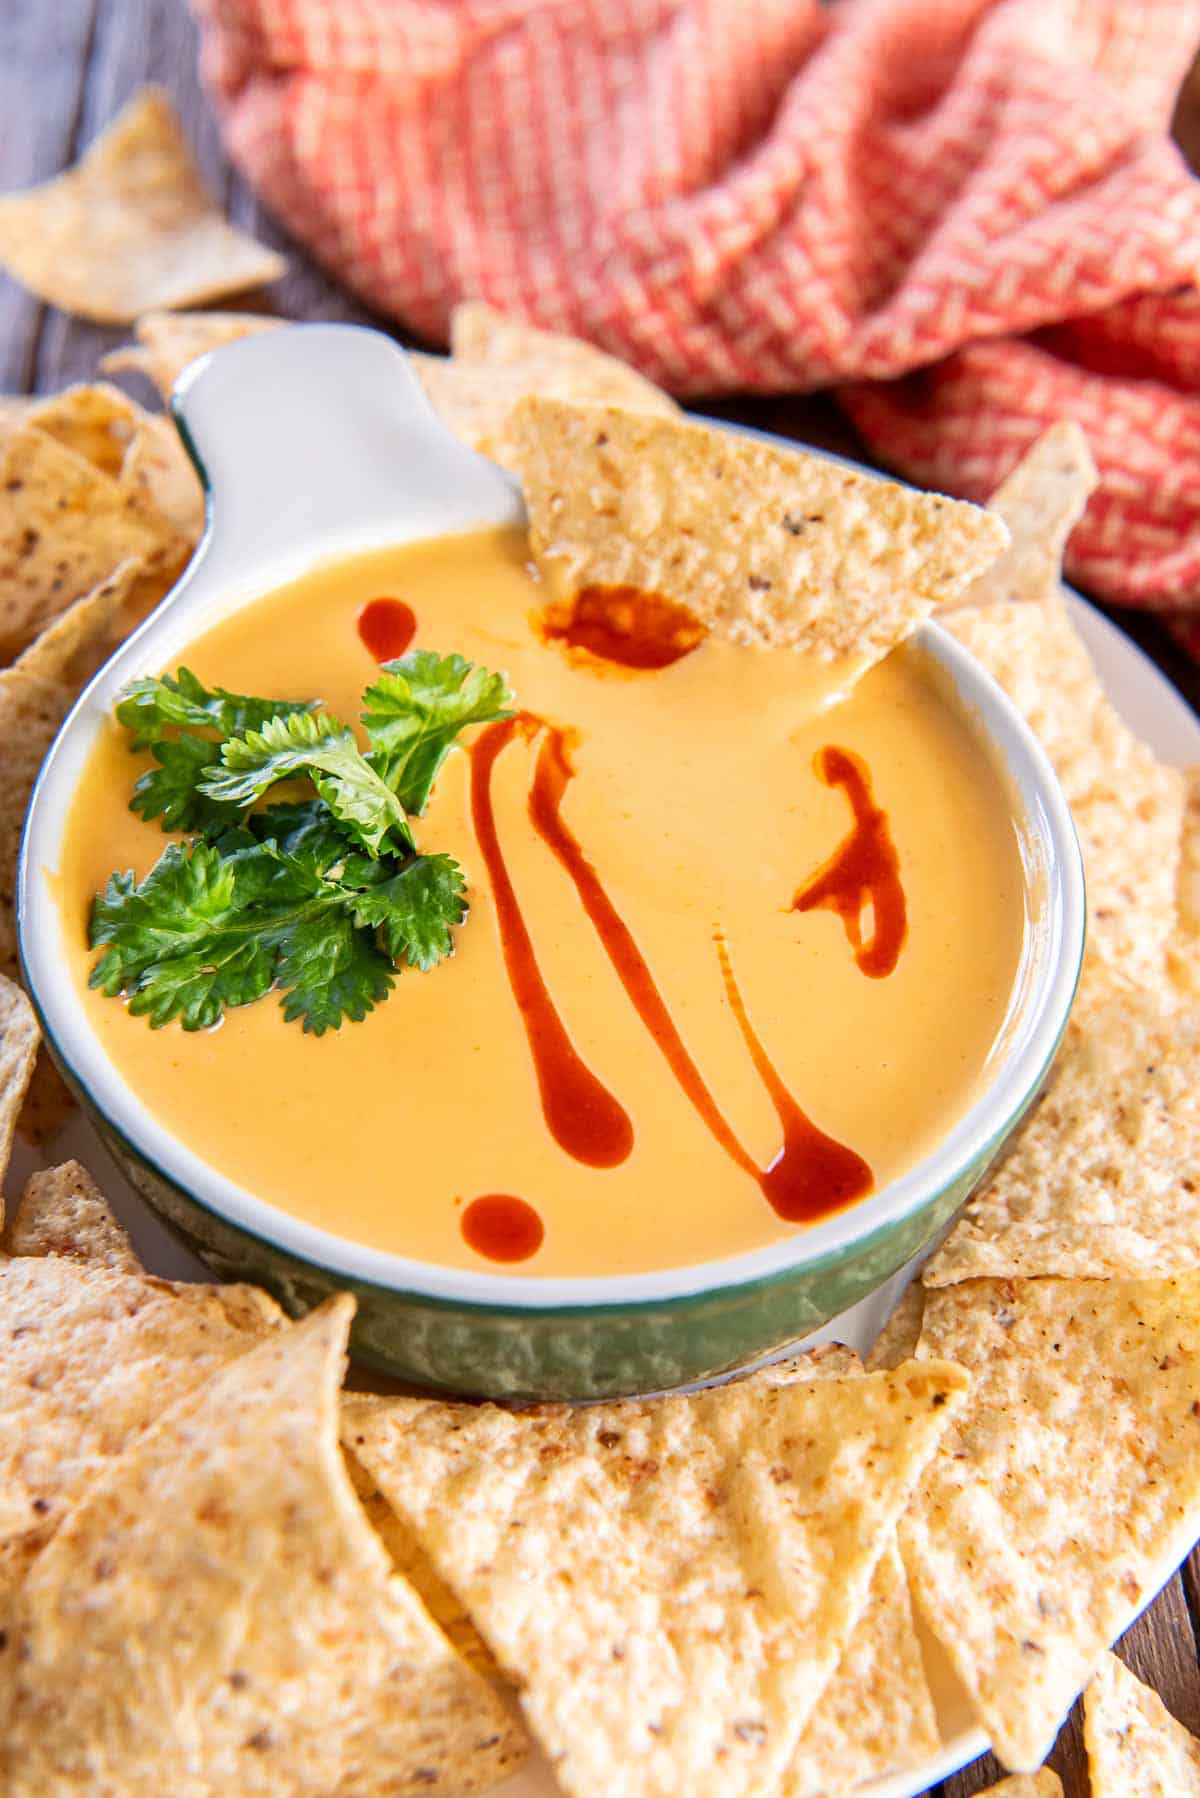 A tortilla chip dipping into a small dish of nacho cheese sauce.